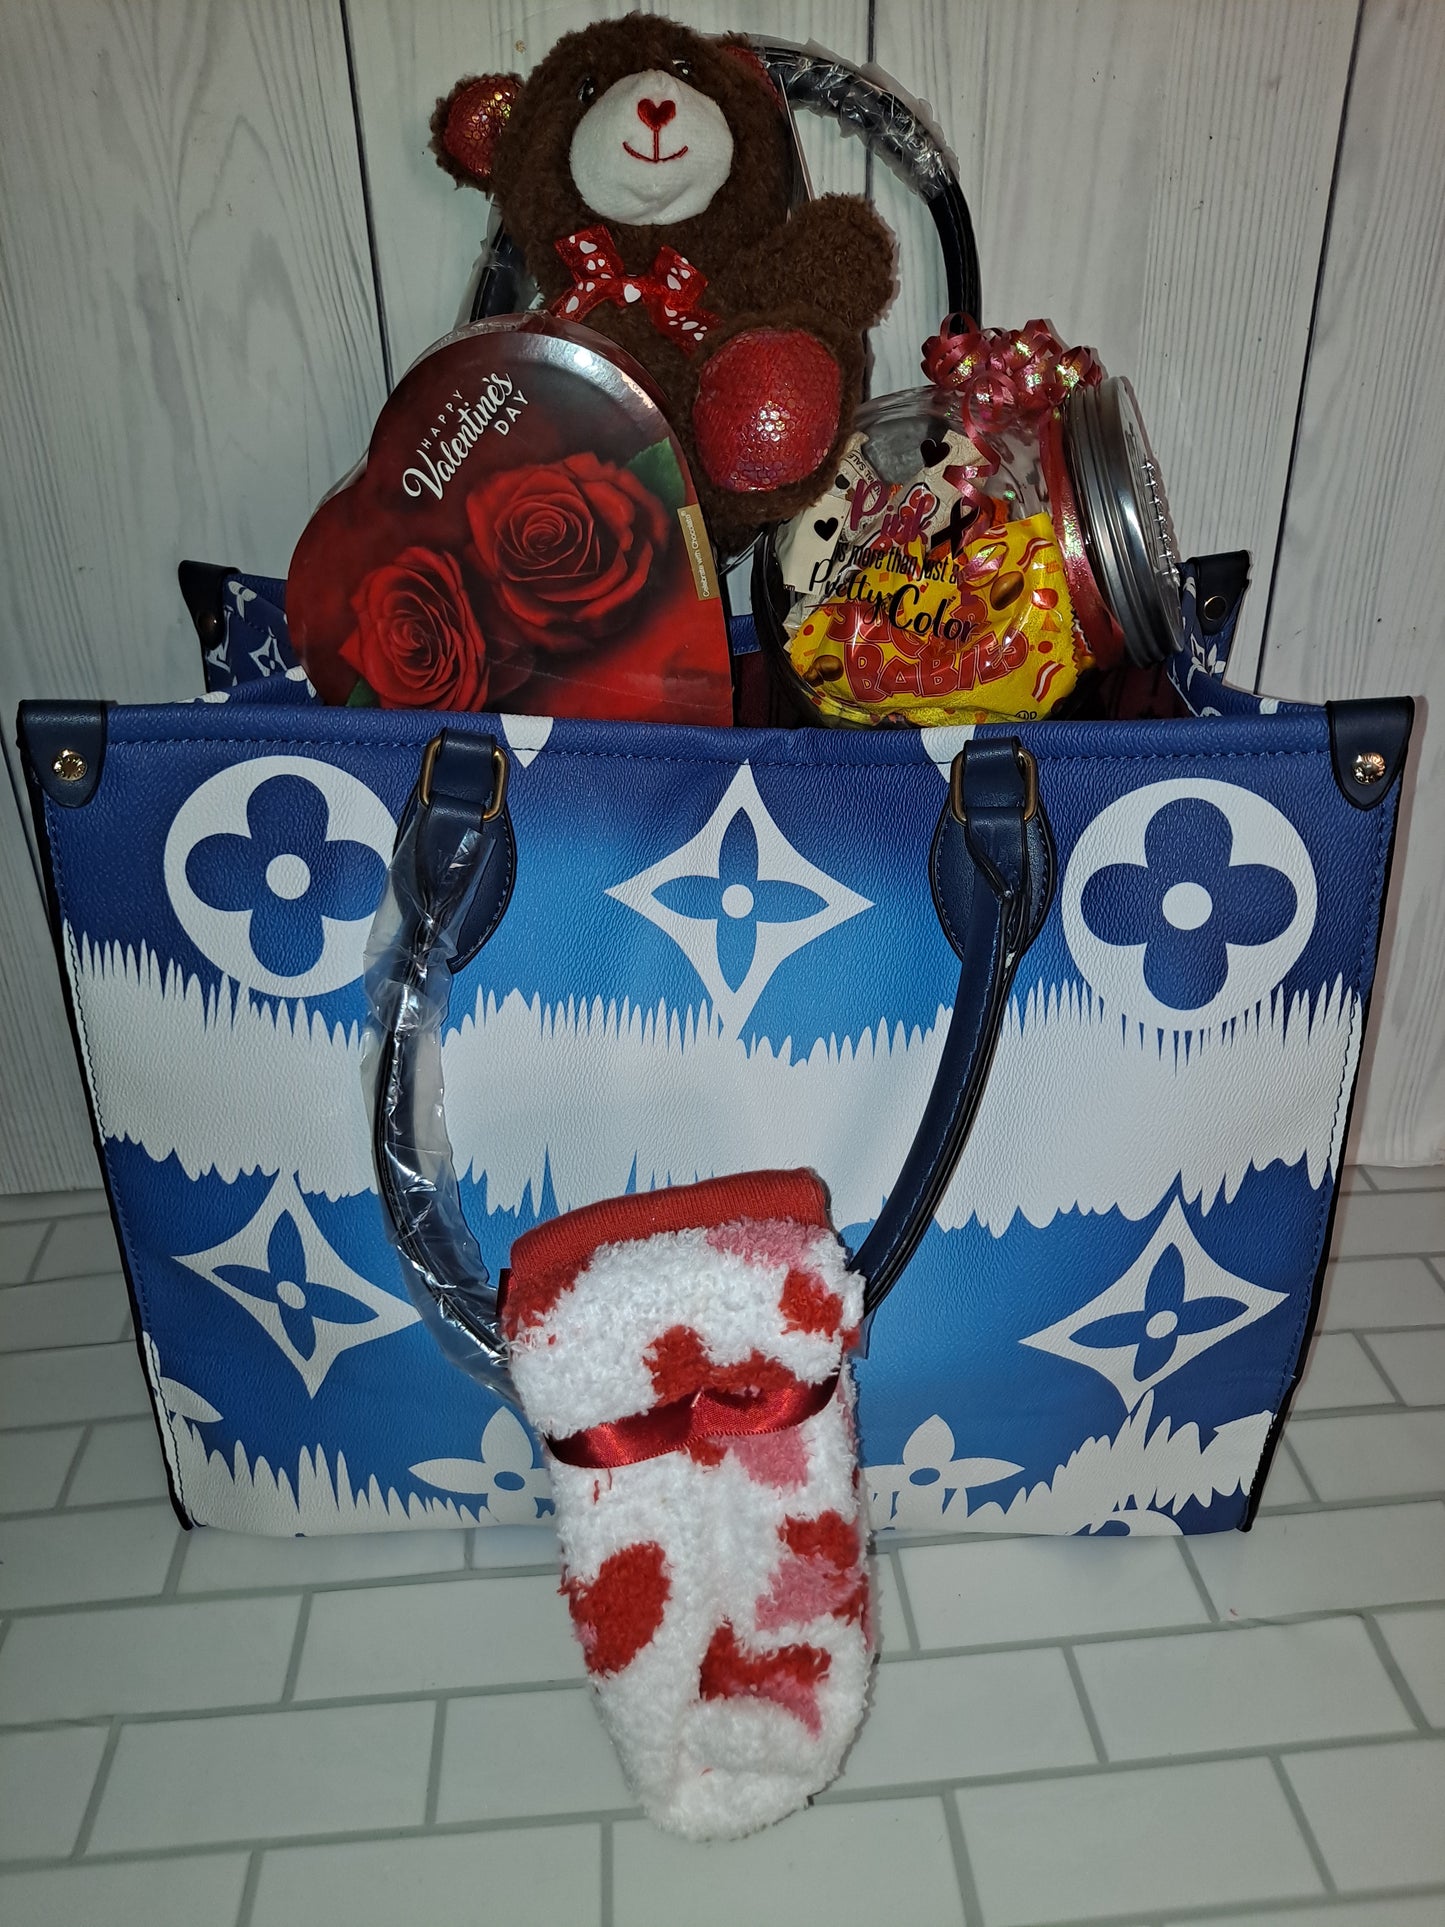 HOLIDAYS BAGS GIFT BASKETS